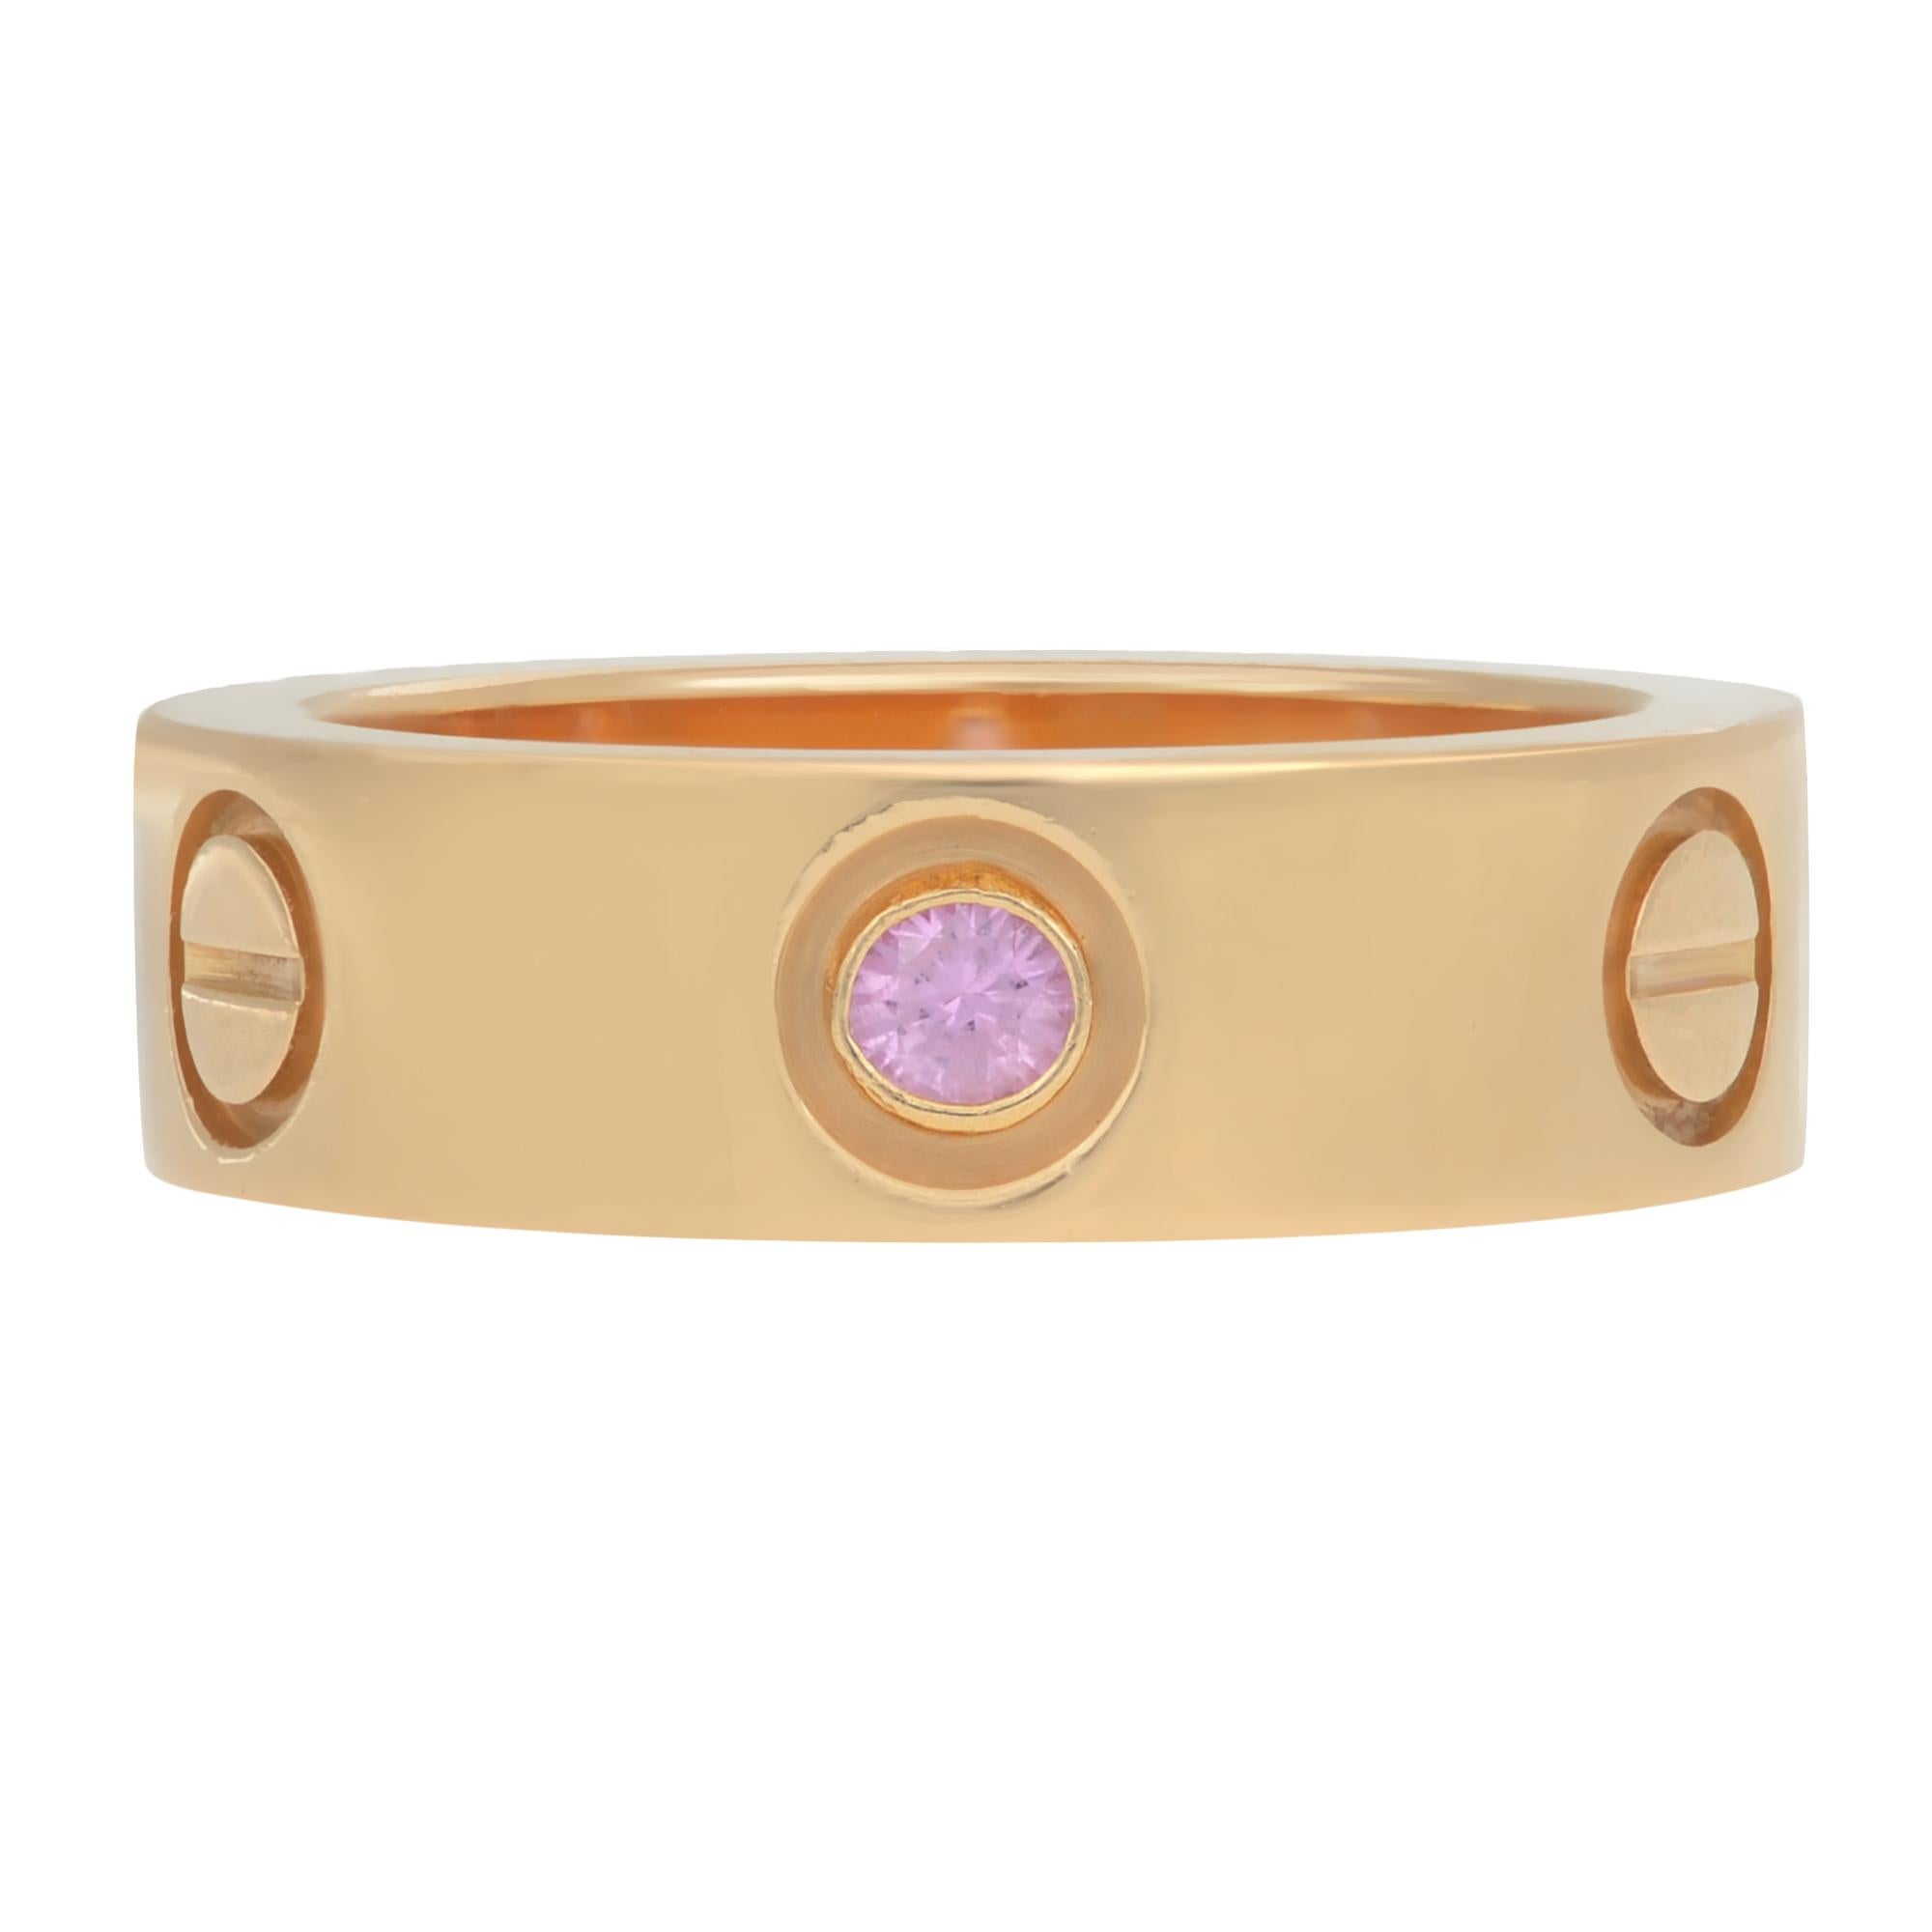 Cartier Love ring crafted in 1k rose gold and set with one round Pink Sapphire weighing an estimated 0.30 carats. Signed Cartier, 50, 750, with serial number. Ring size 50 US 5.25. Width: 5.60mm. Excellent pre-owned condition. Come with original box